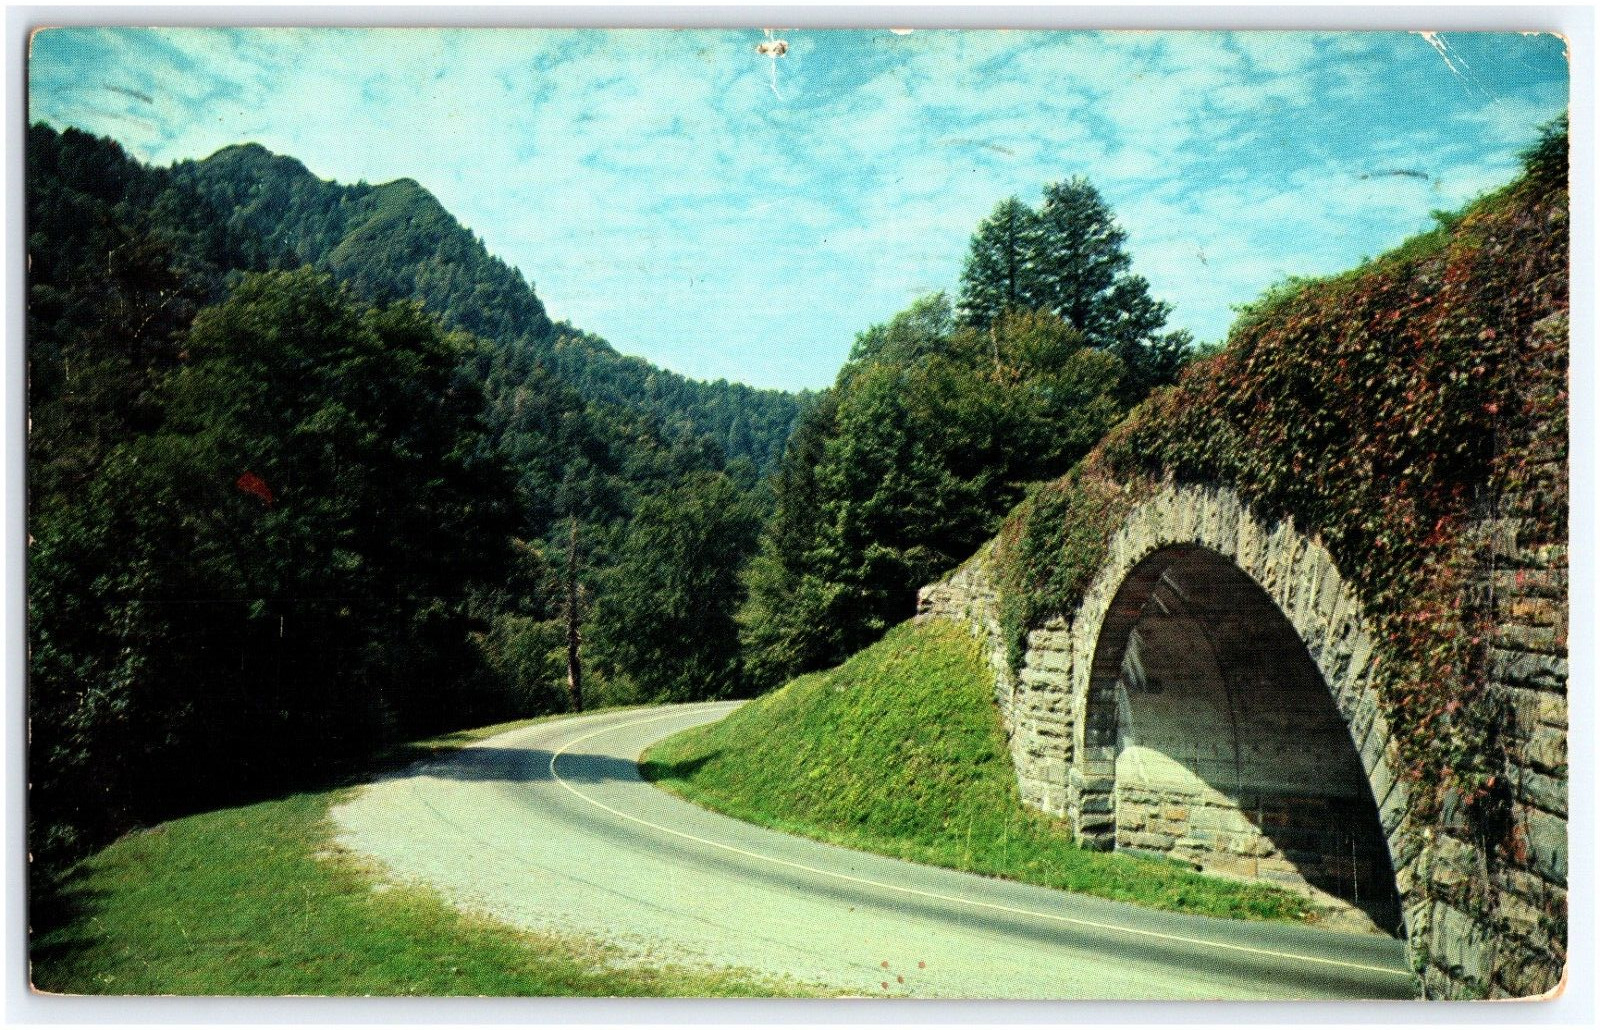 CHIMNEY TOPS AND LOOP OVERPASS US 441 TUNNEL GREAT SMOKY MOUNTAINS POSTCARD